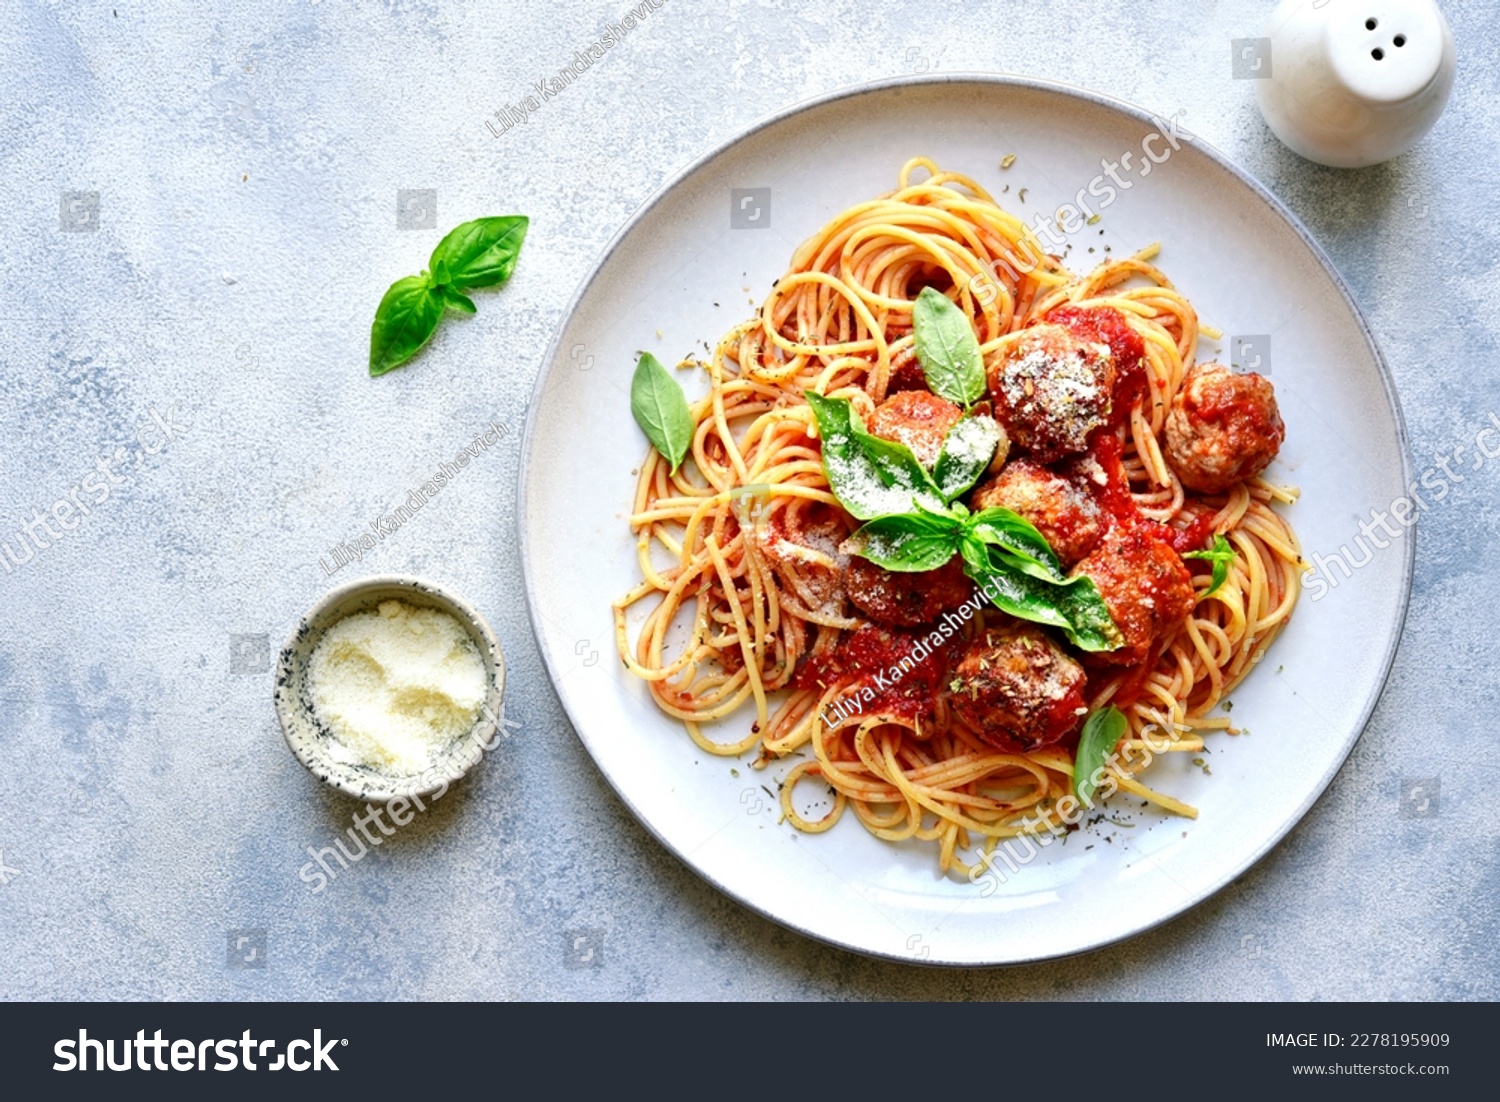 Pasta spaghetti with meat ball in tomato sauce on a plate over light grey slate, stone or concrete background. Top view with copy space. #2278195909